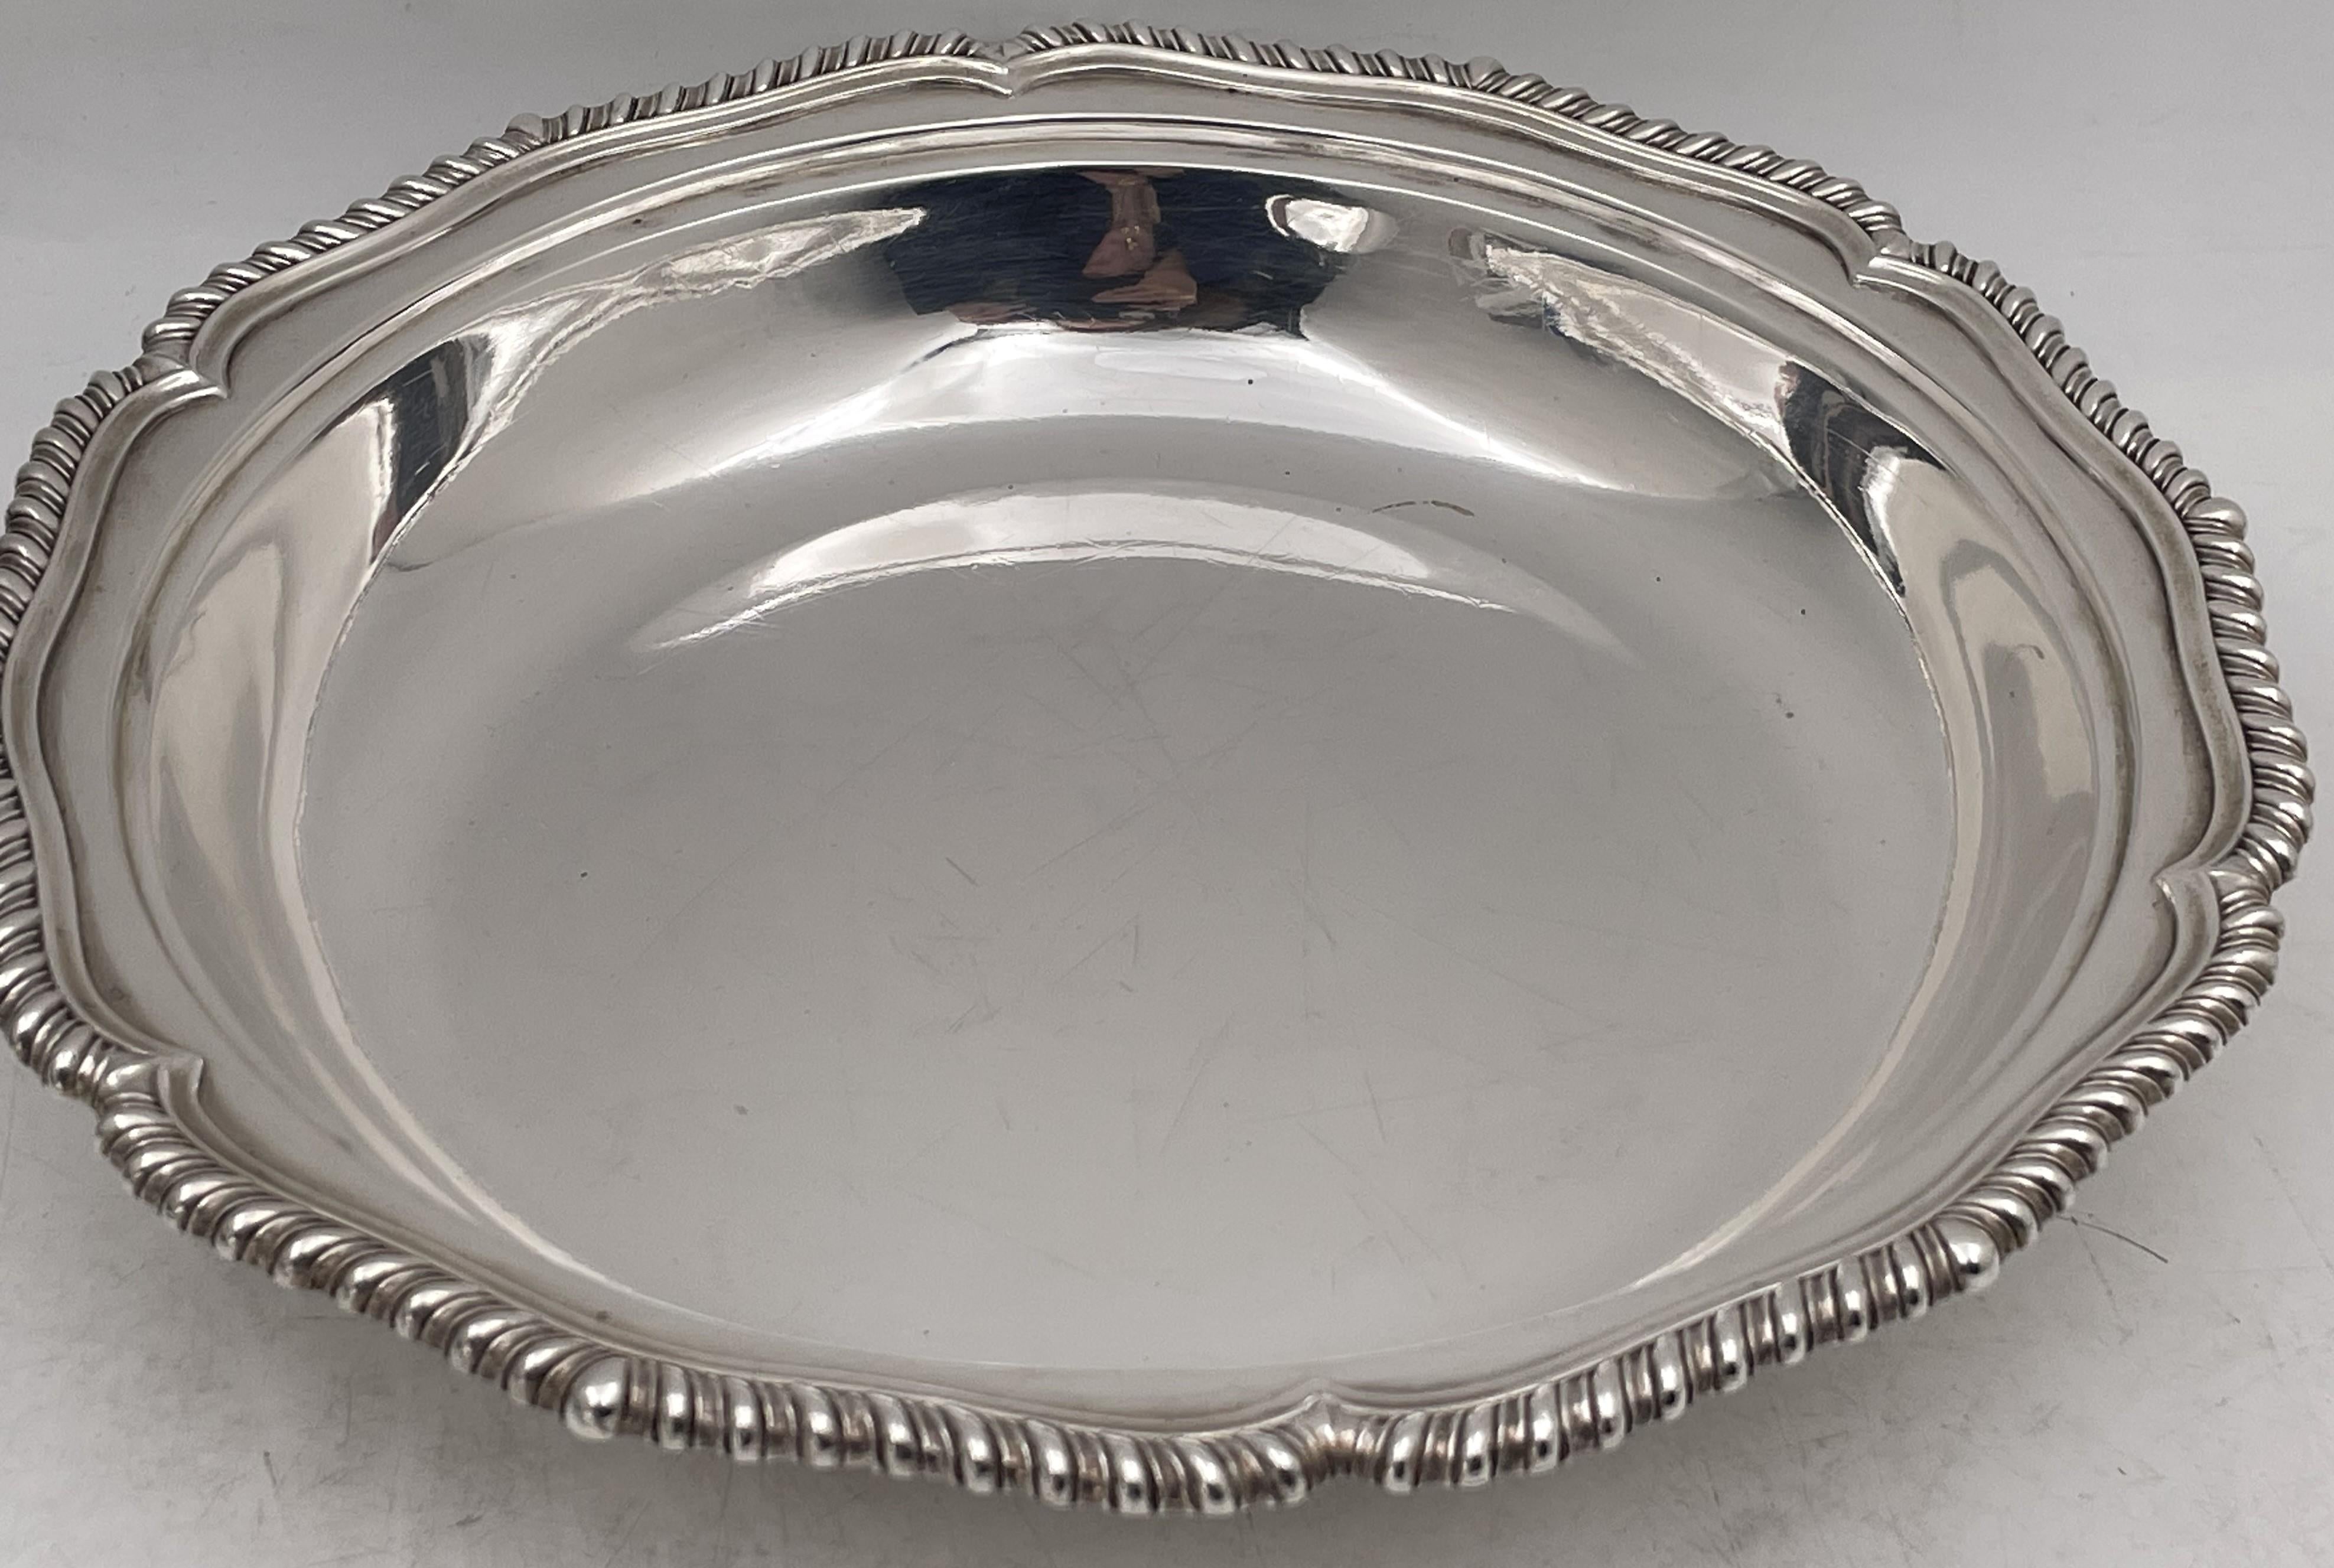 William Mann, English sterling silver covered bowl or dish from the Victorian era ; the bowl is from 1846 and the lid is from 1858. This beautifully shaped covered bowl exhibits the Latin motto of John Rolle, a member of the House of Lords: 